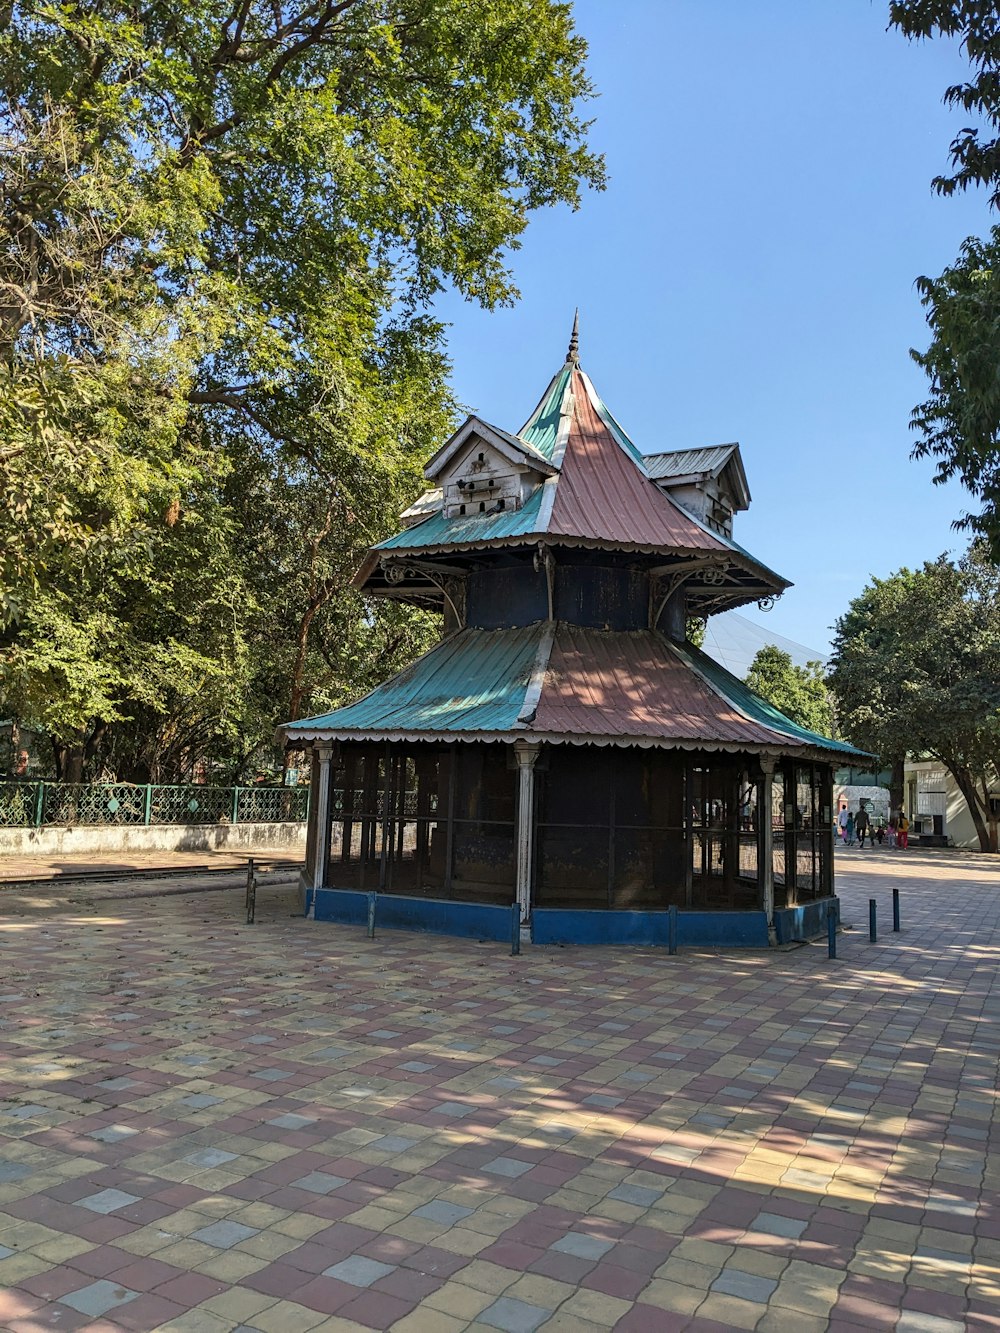 a gazebo in the middle of a park surrounded by trees